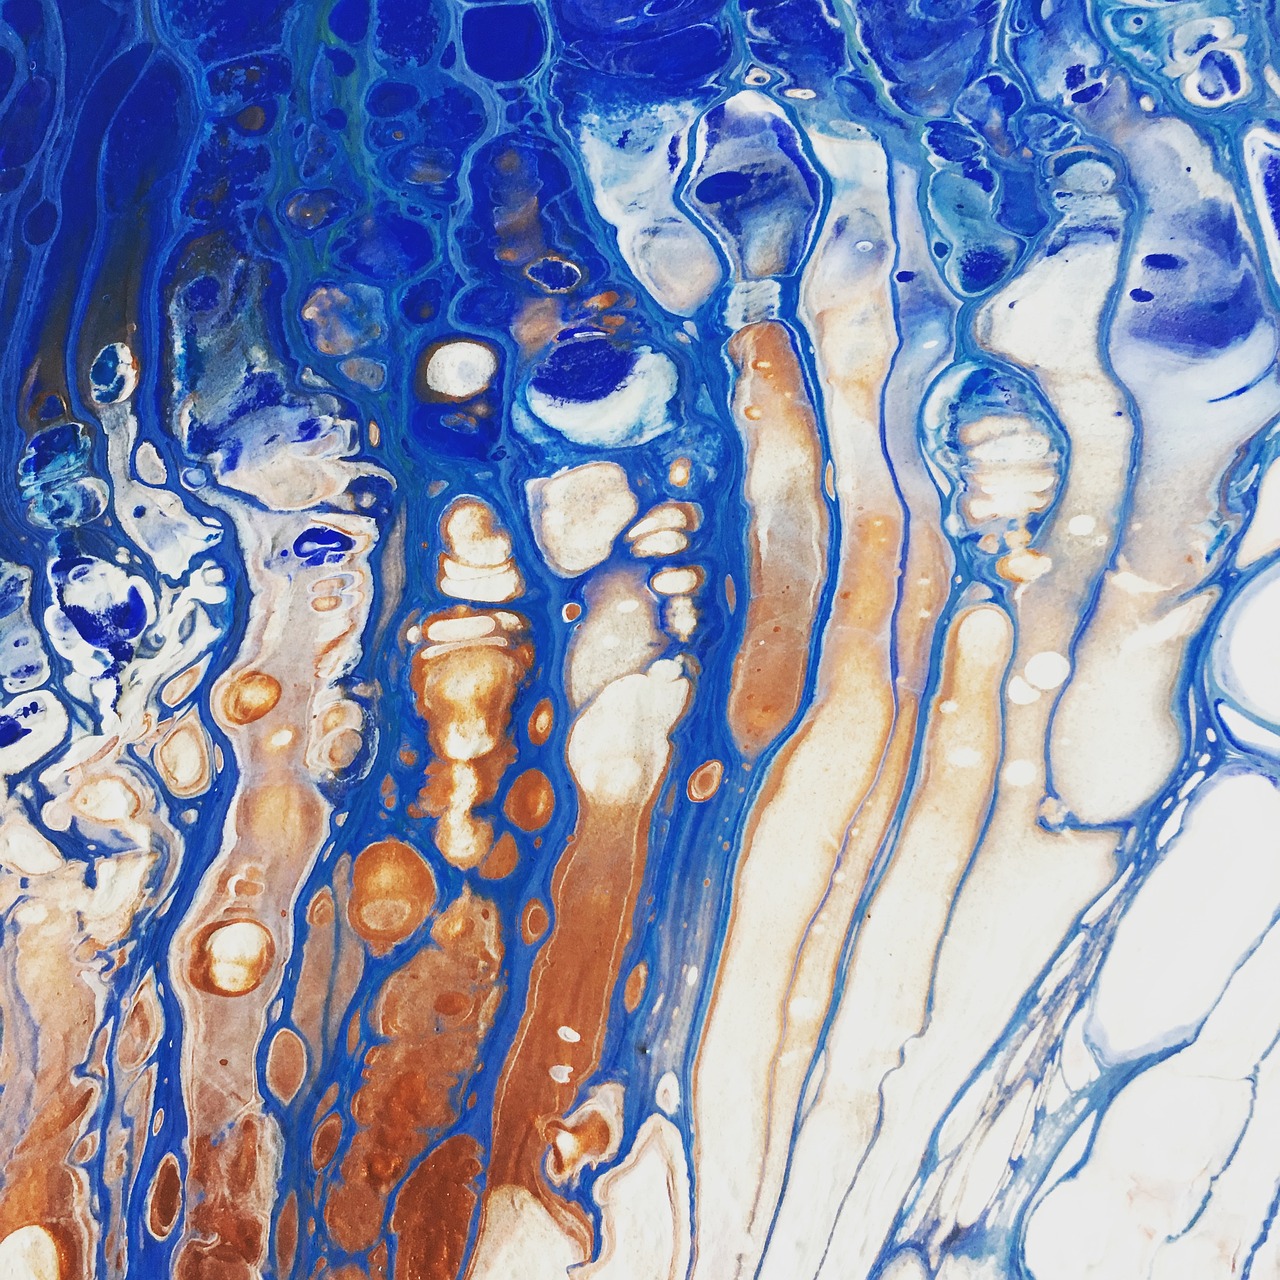 Close up image of a blue and orange paint pouring artwork